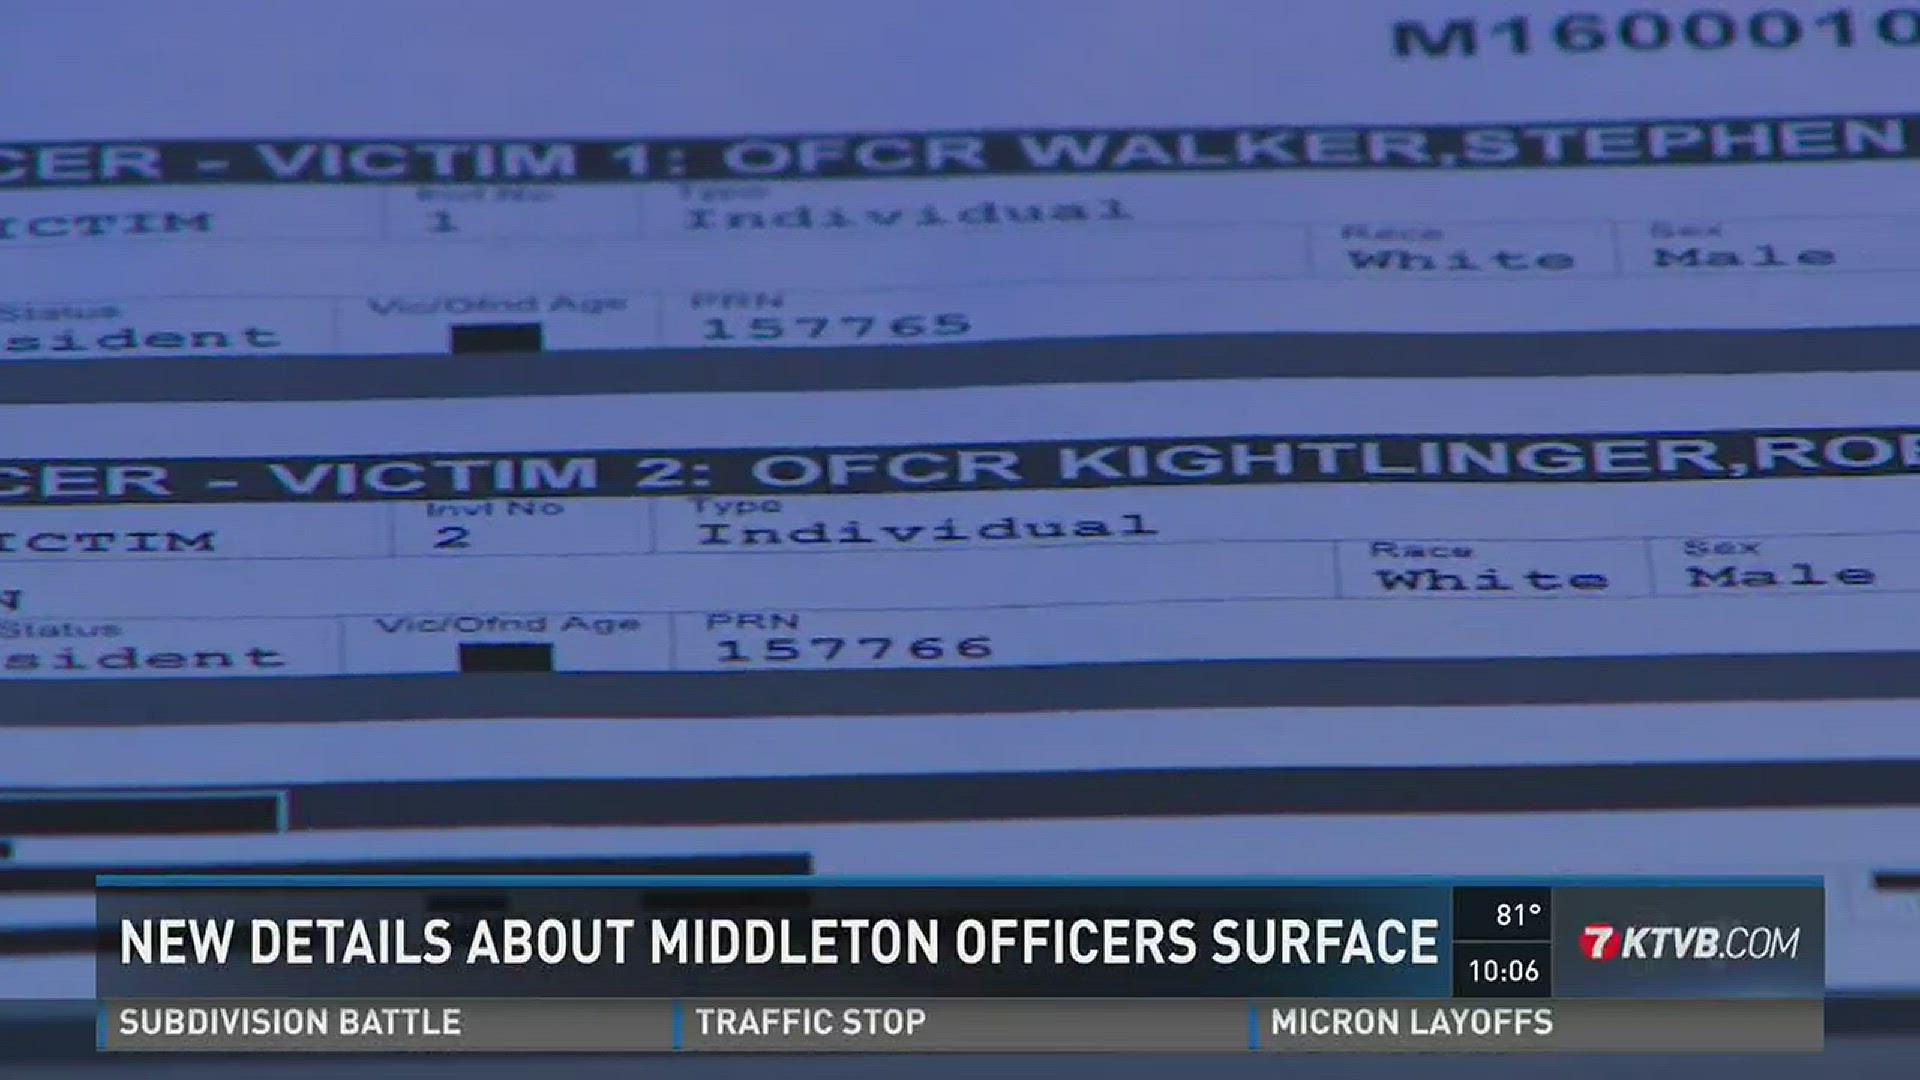 New details about Middleton officers surface.